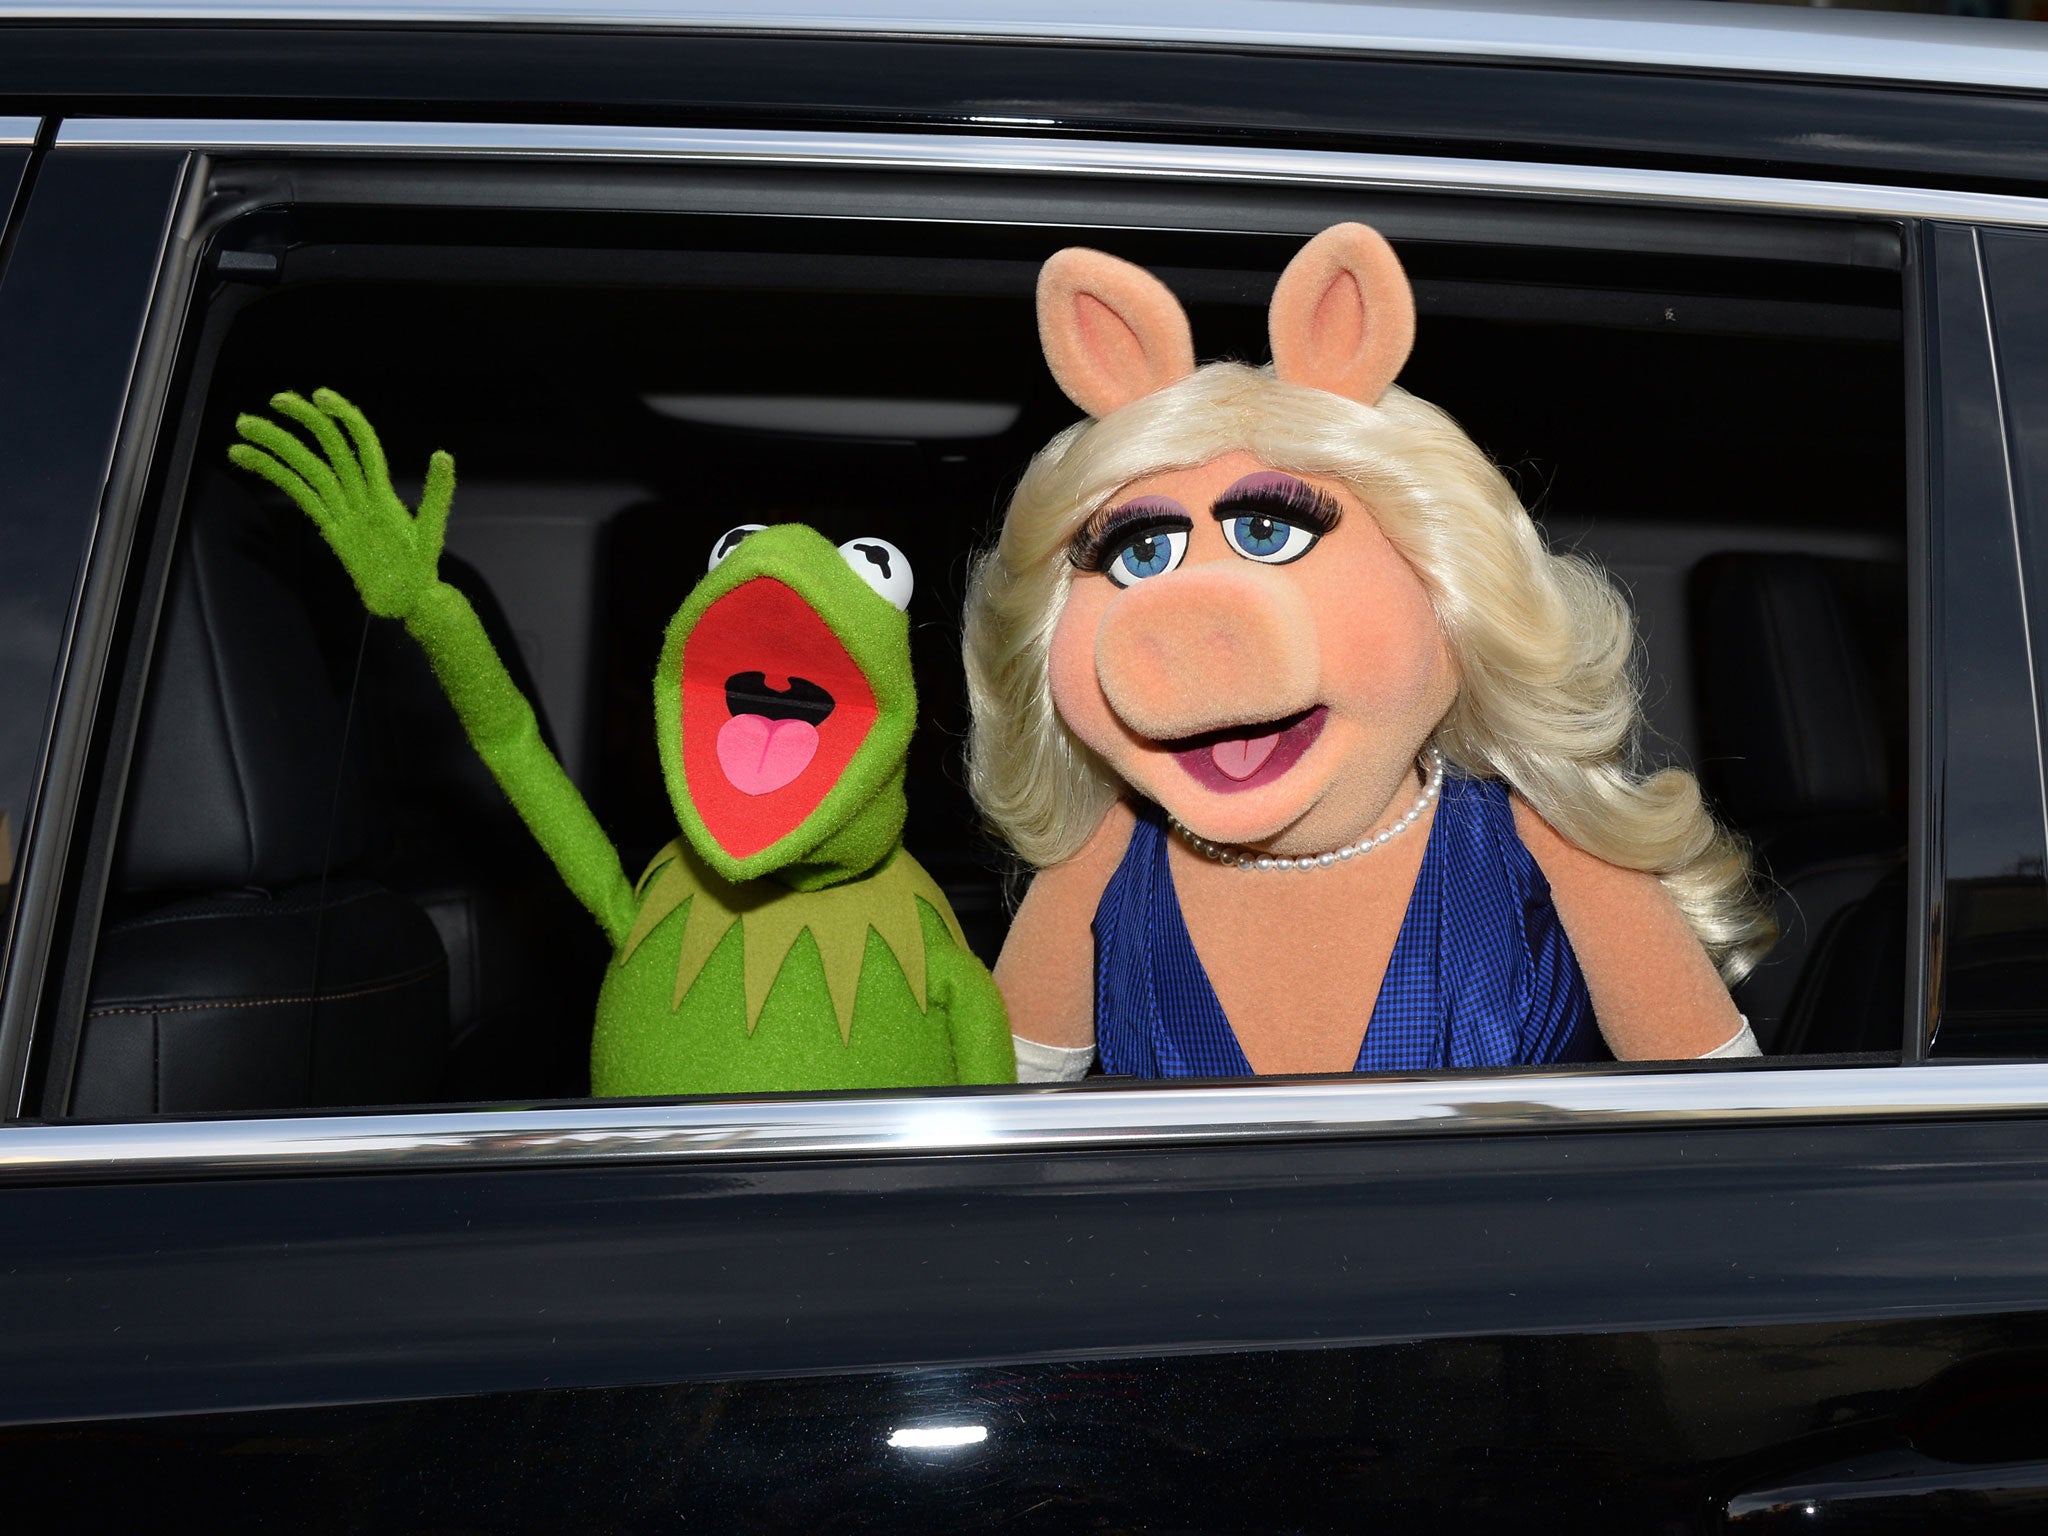 The Muppets may be returning to television screens in the near future